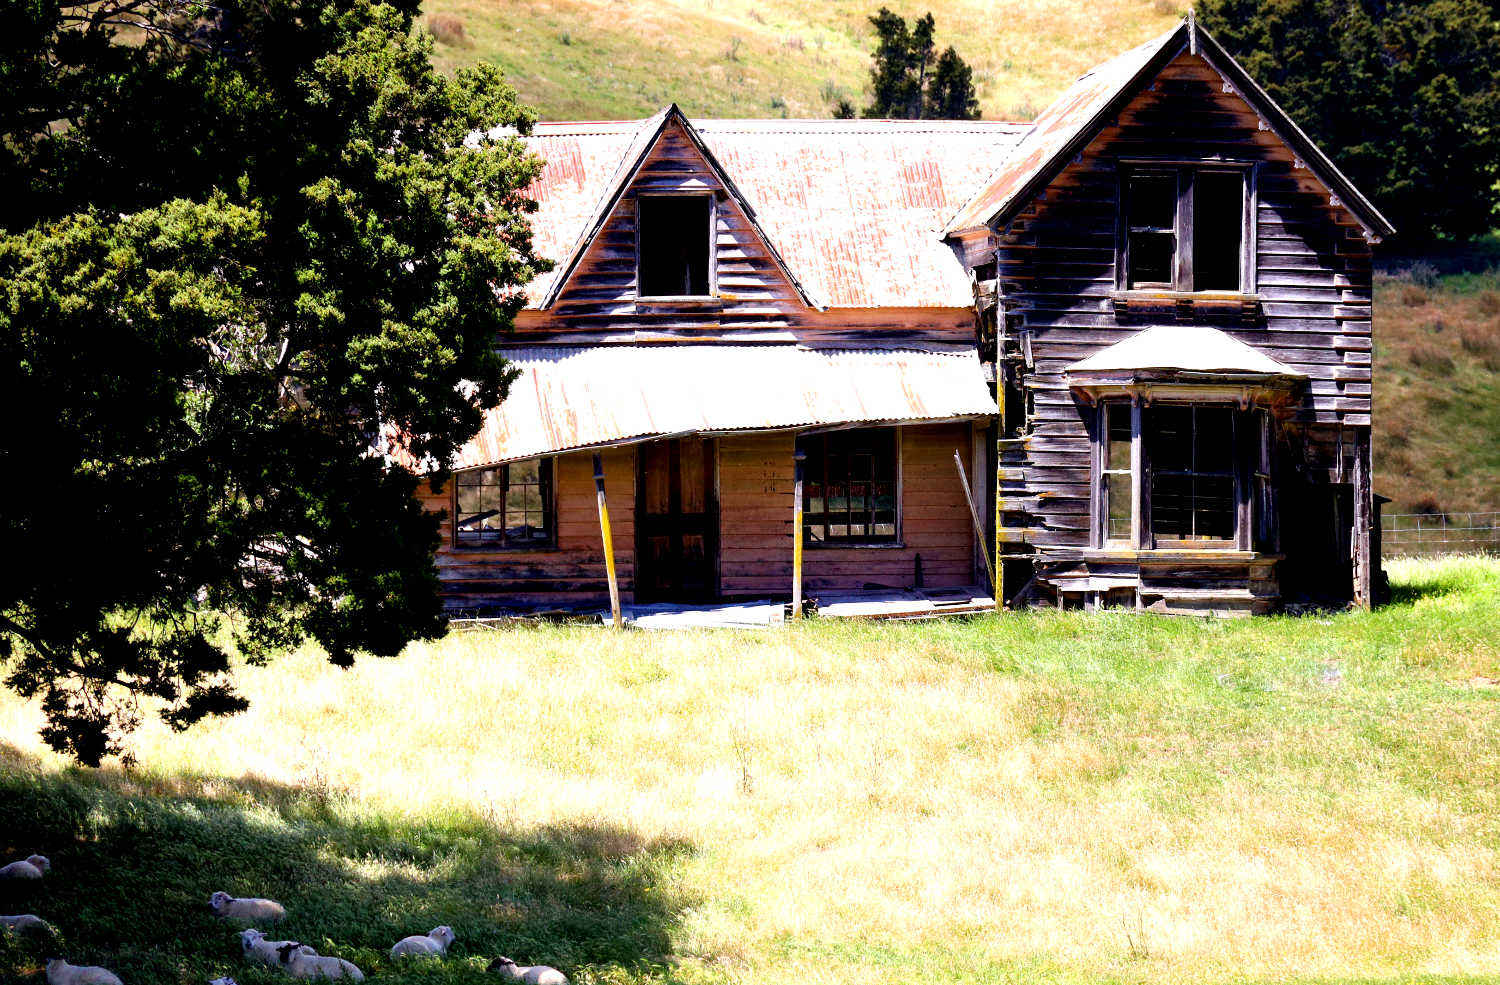 Nelson to Murchison abandoned home Spring Grove, New Zealand